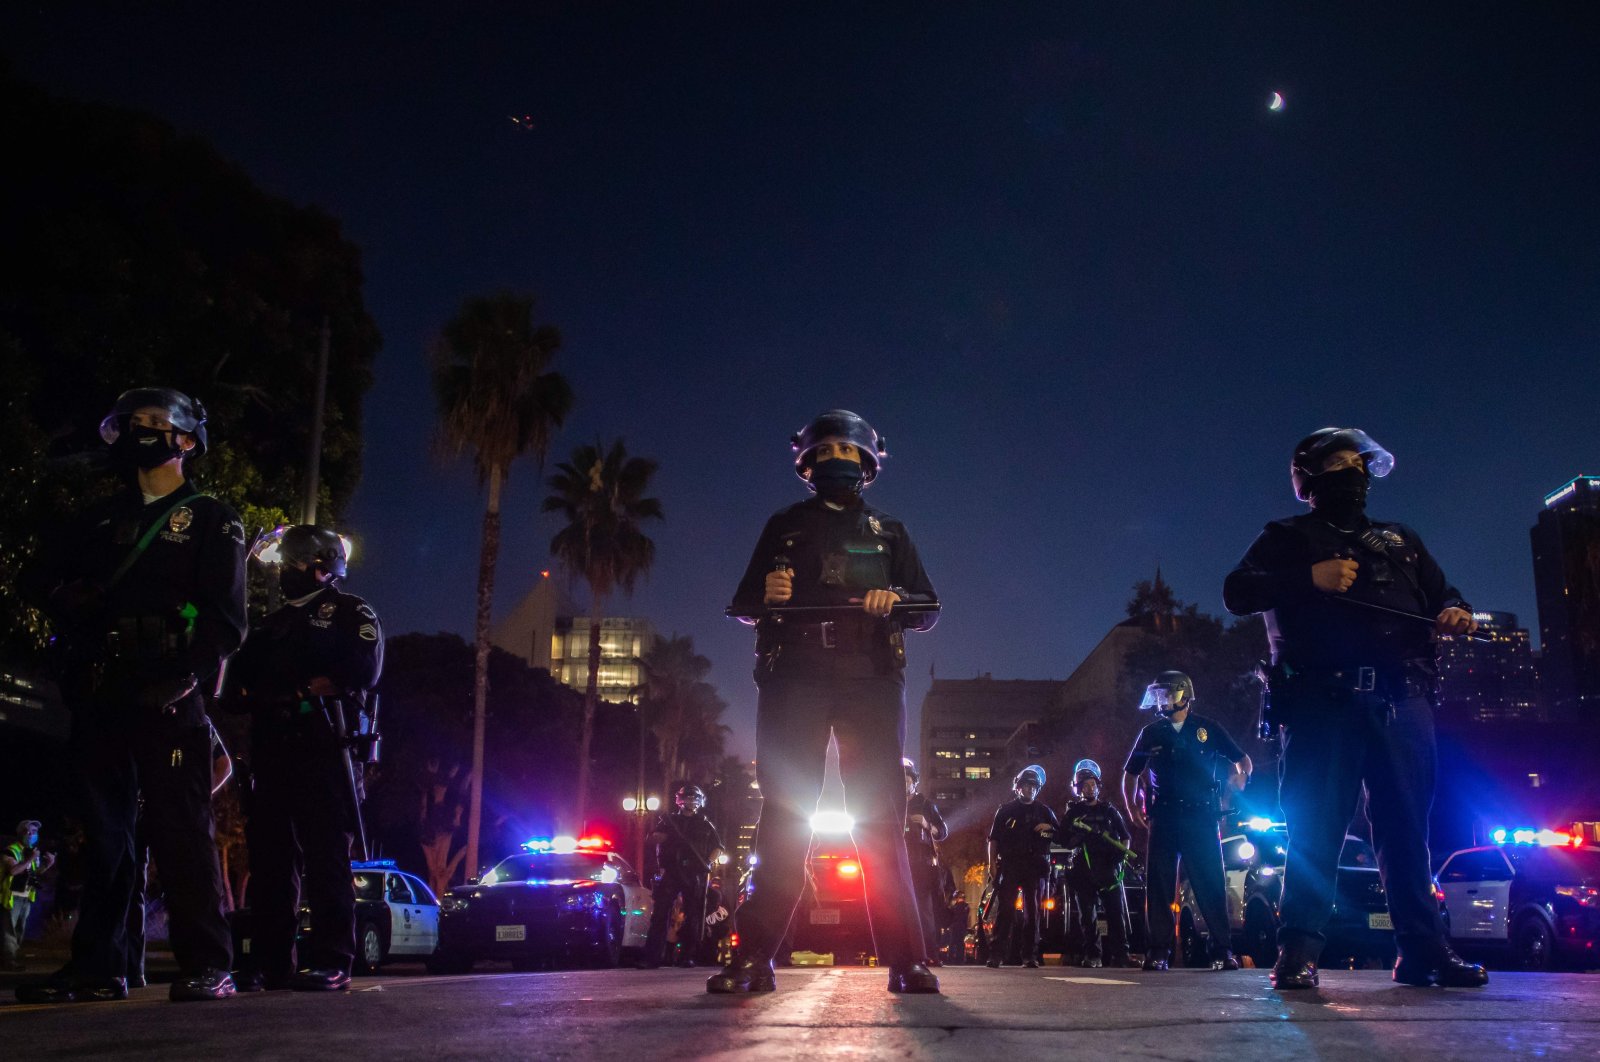 Police officers hold a line in front of LA City Hall during a protest demanding justice for George Floyd, Breonna Taylor and also in solidarity with Portland's protests, in Downtown Los Angeles, California, July 25, 2020. (AFP Photo)